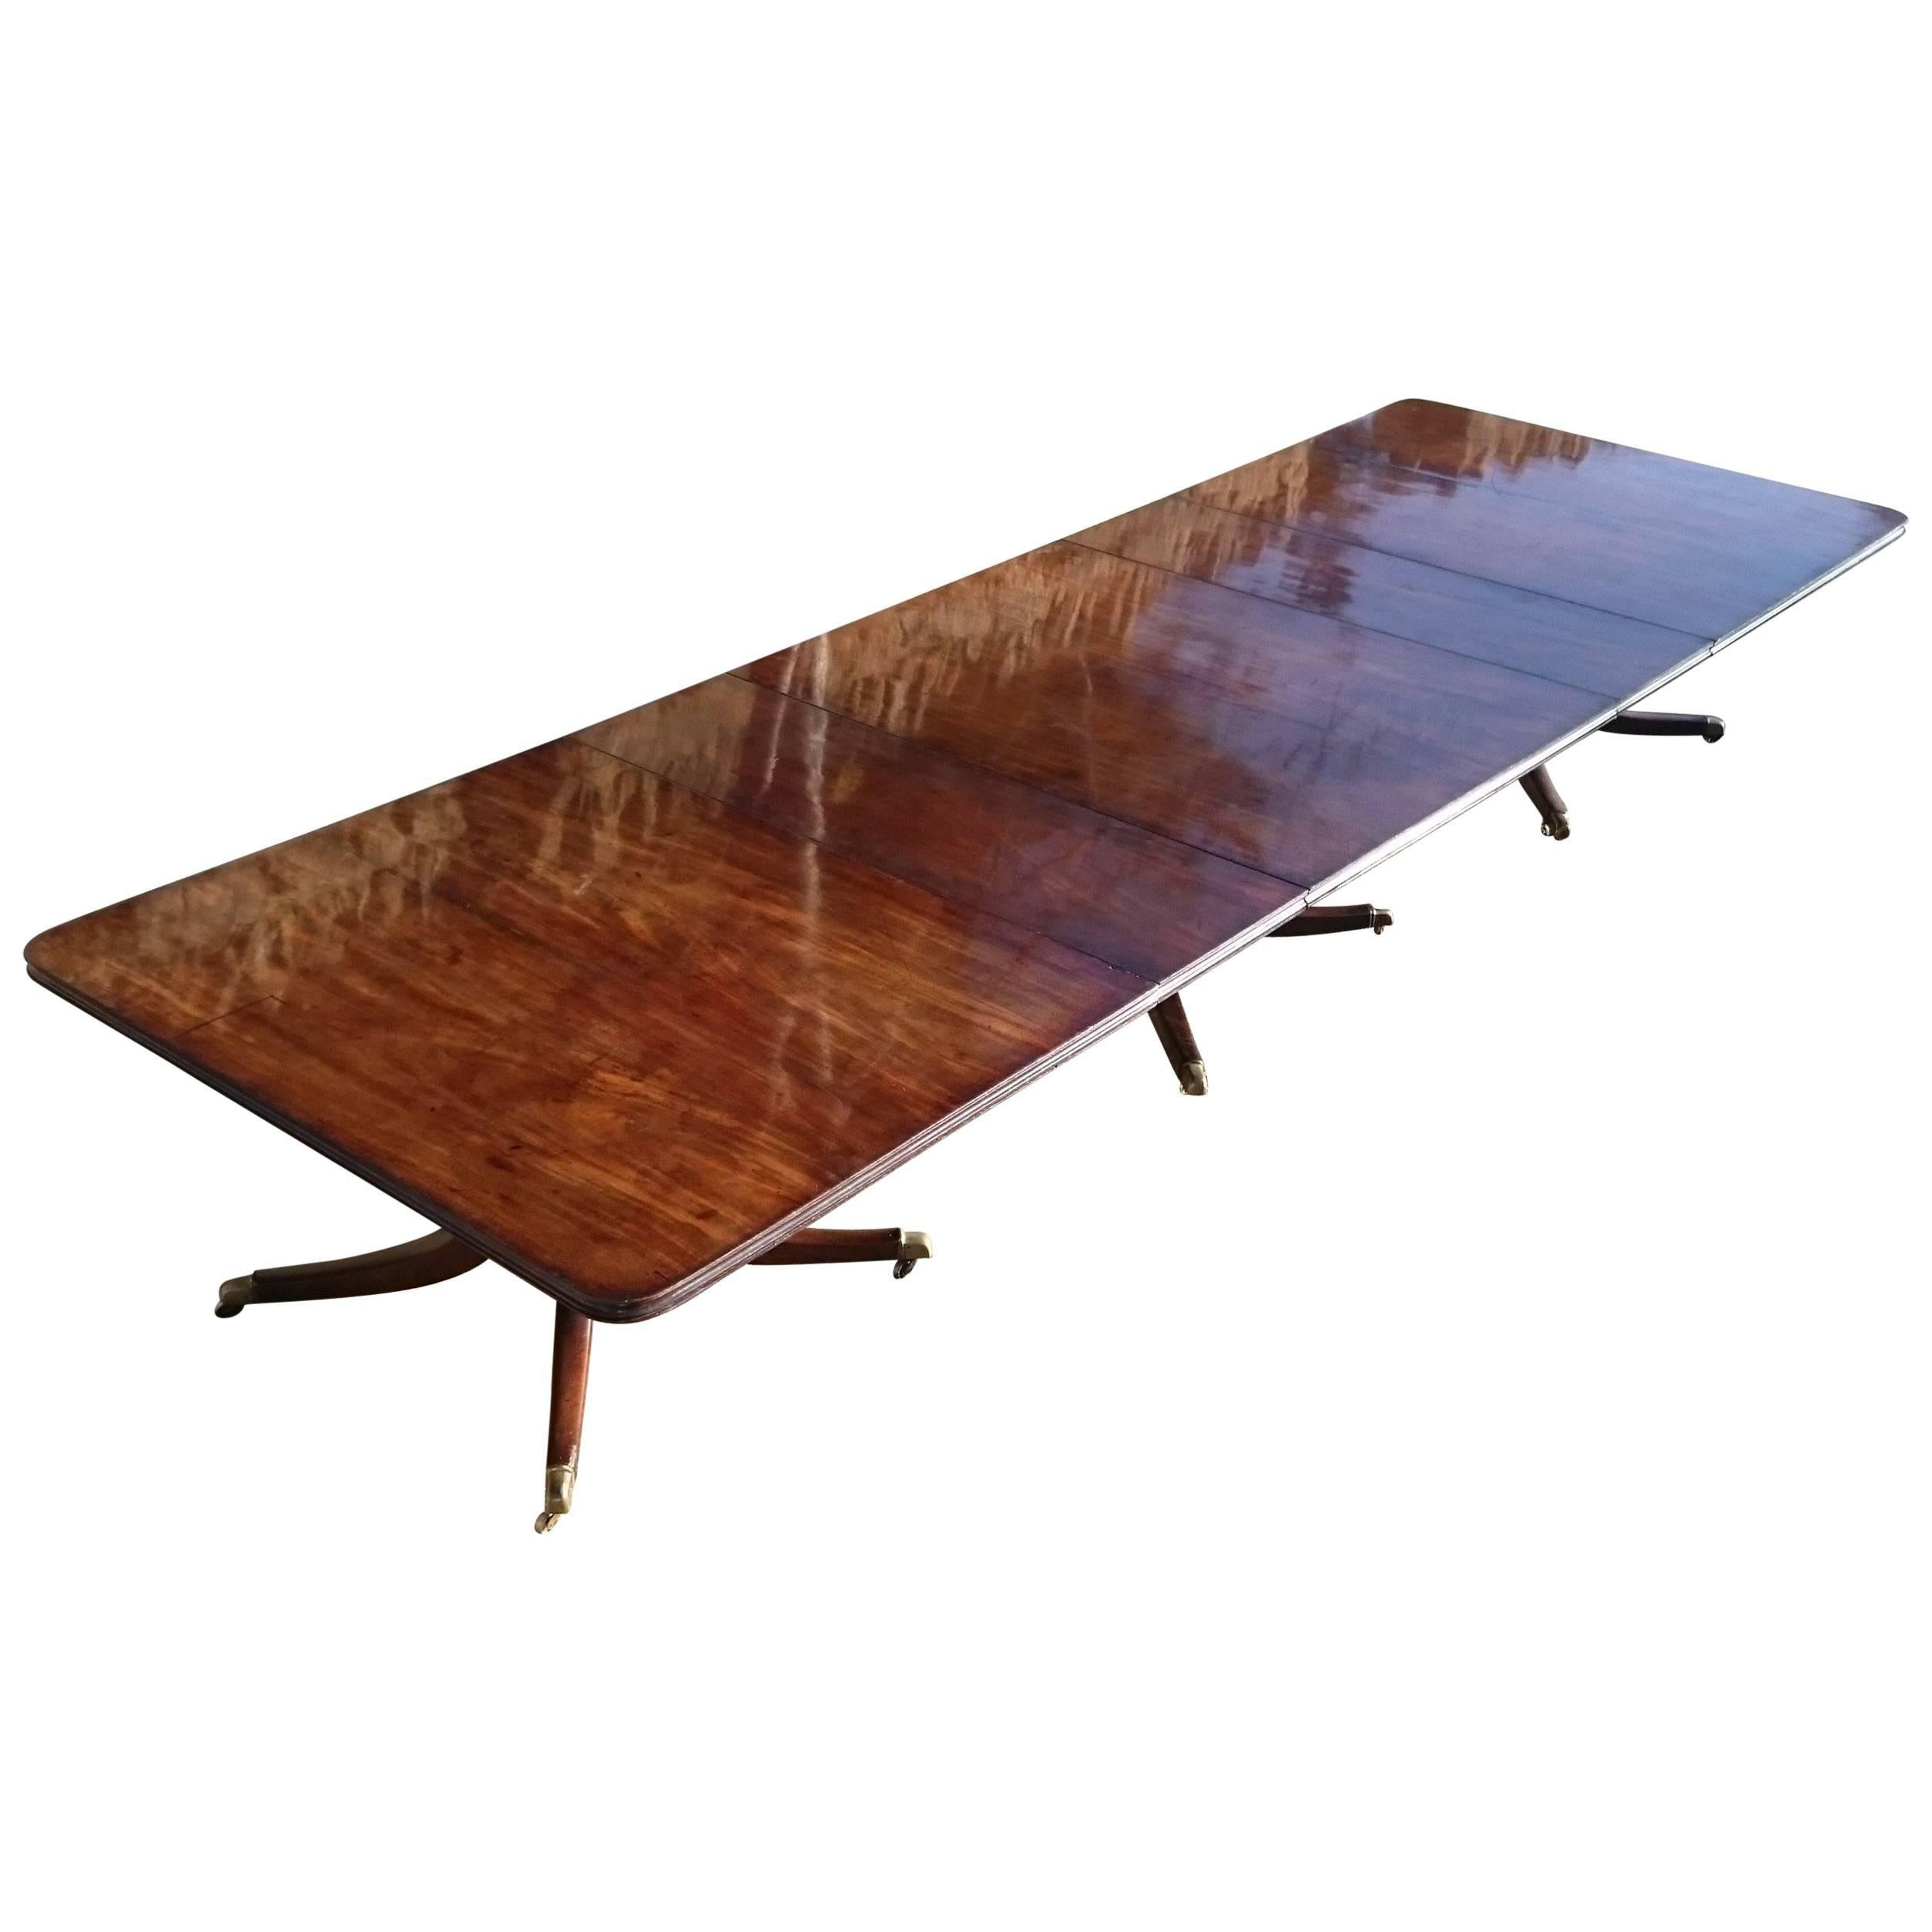 Large-Scale Important Early 19th Century Irish Three-Pedestal Dining Table